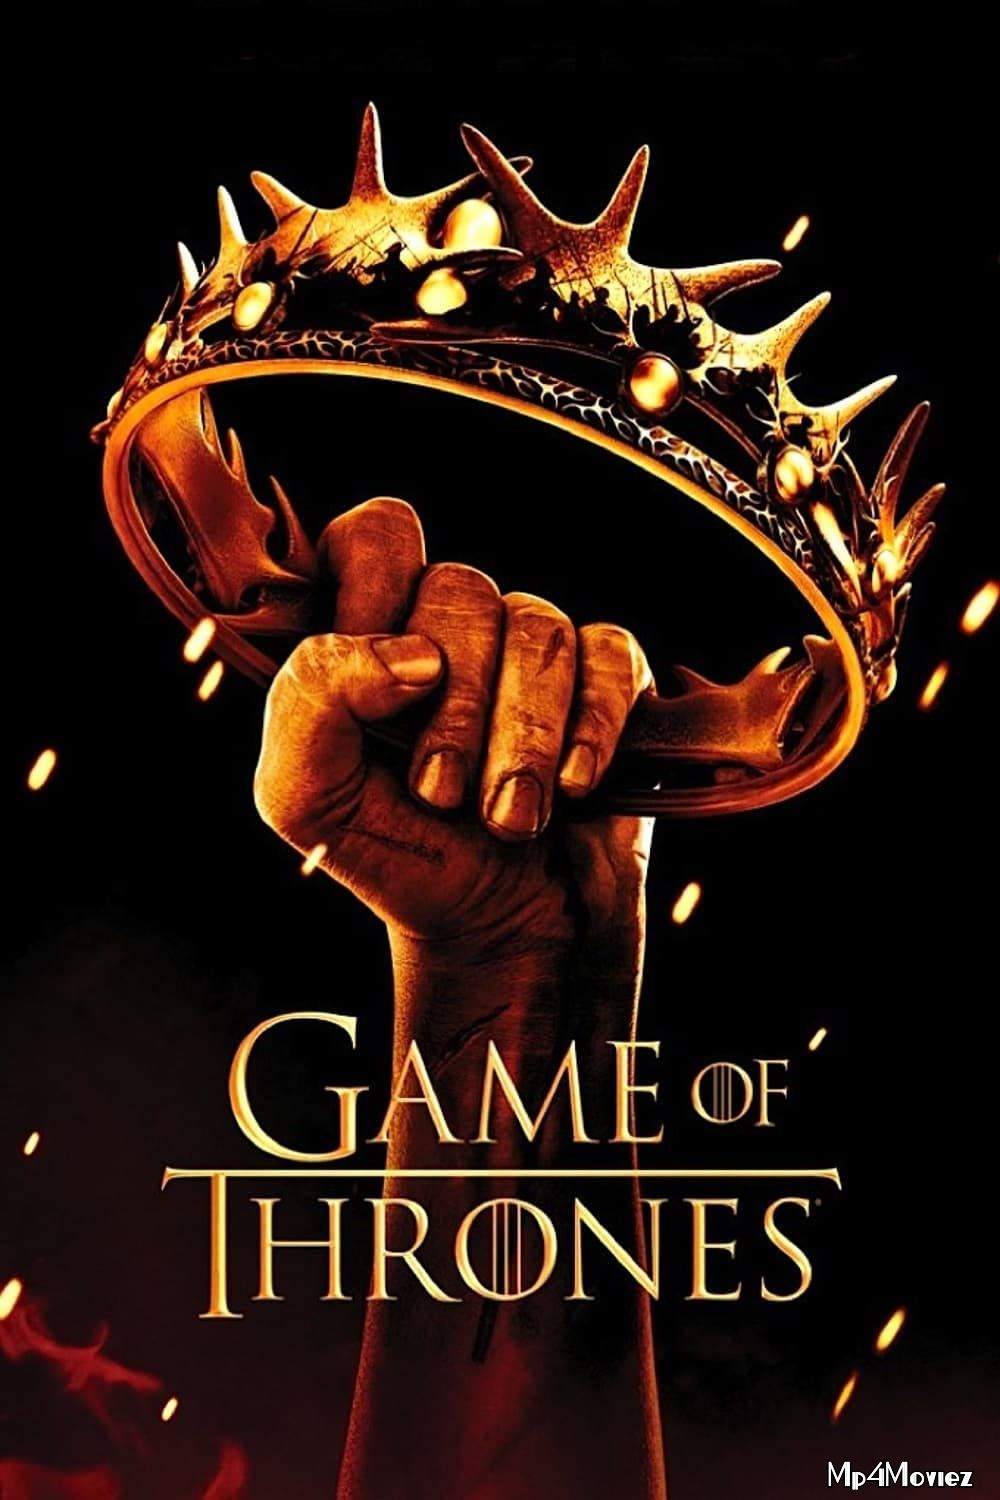 Game of Thrones: Season 1 (Hindi Dubbed + Engish) Complete Series download full movie